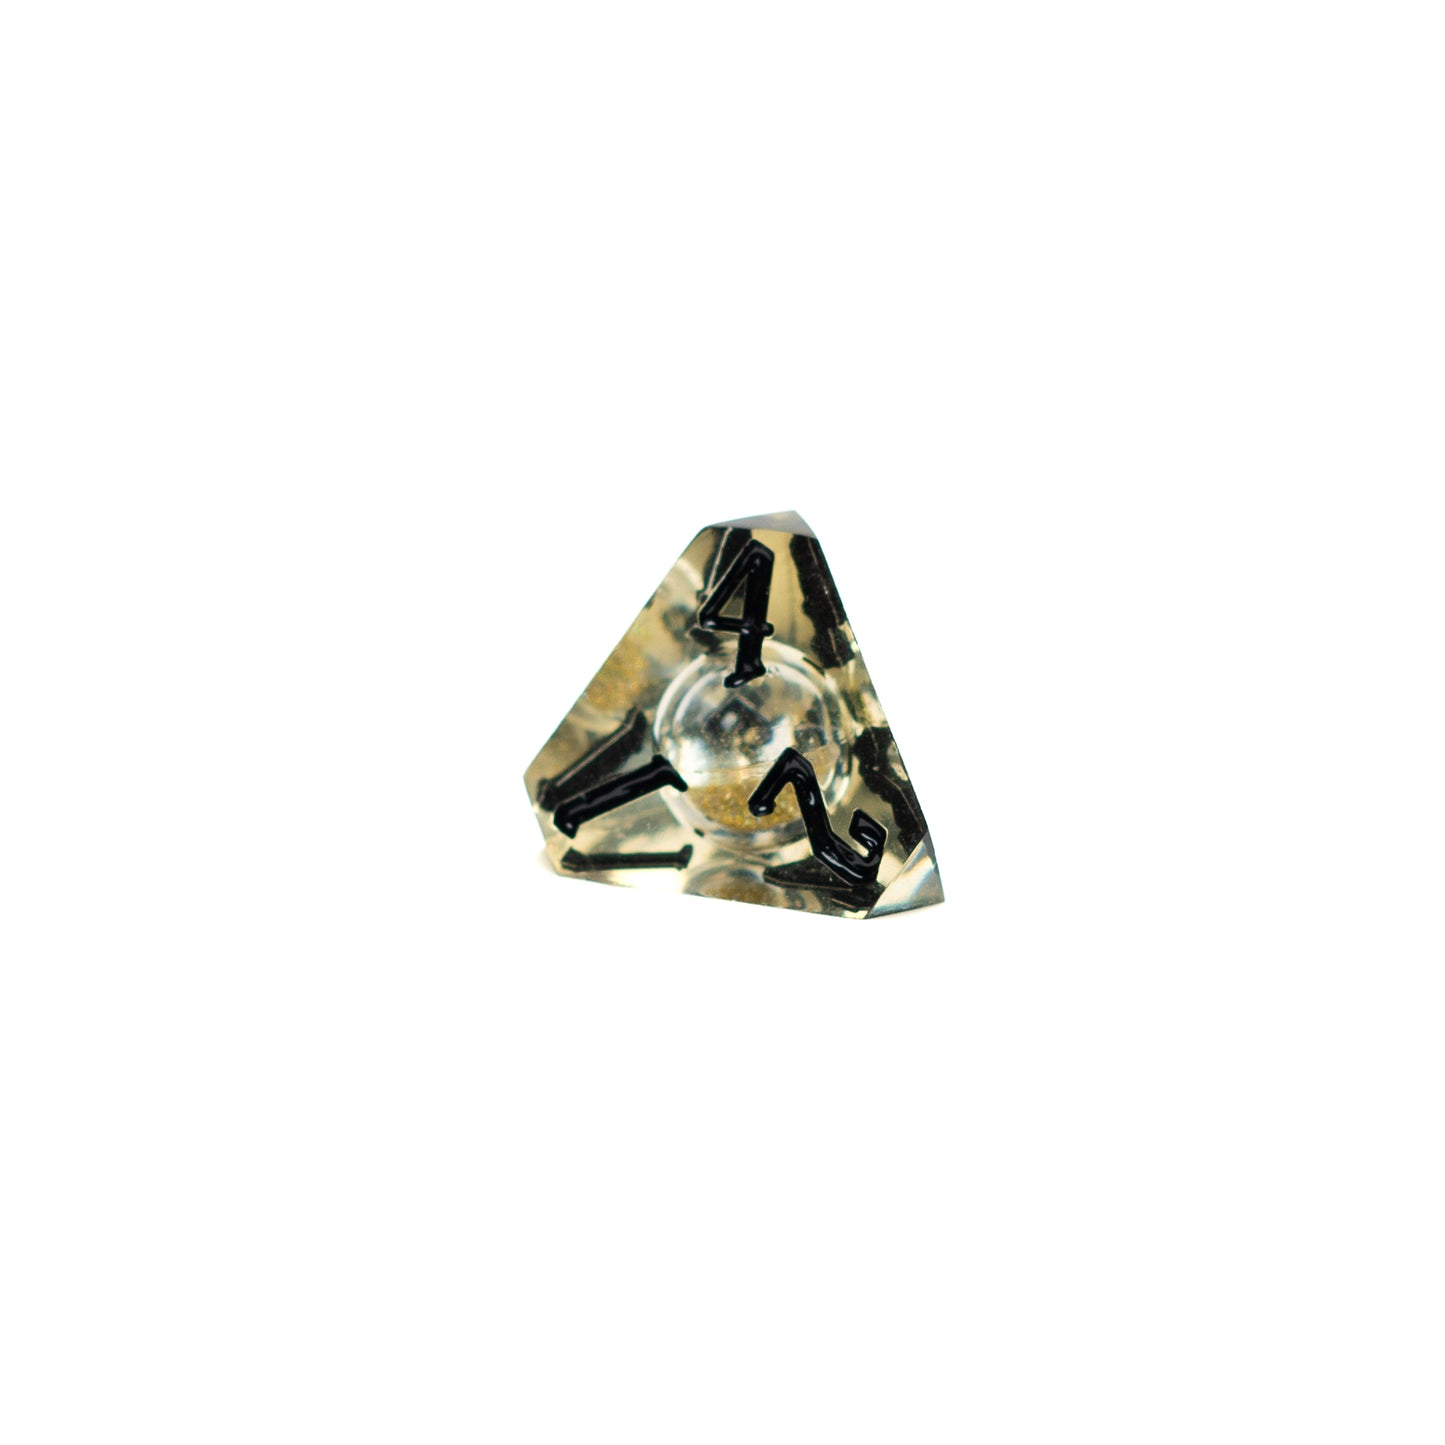 Roll Britannia Sharp Edge Resin Liquid Core Dungeons and Dragons D4 Dice with Gold Glitter Aesthetic